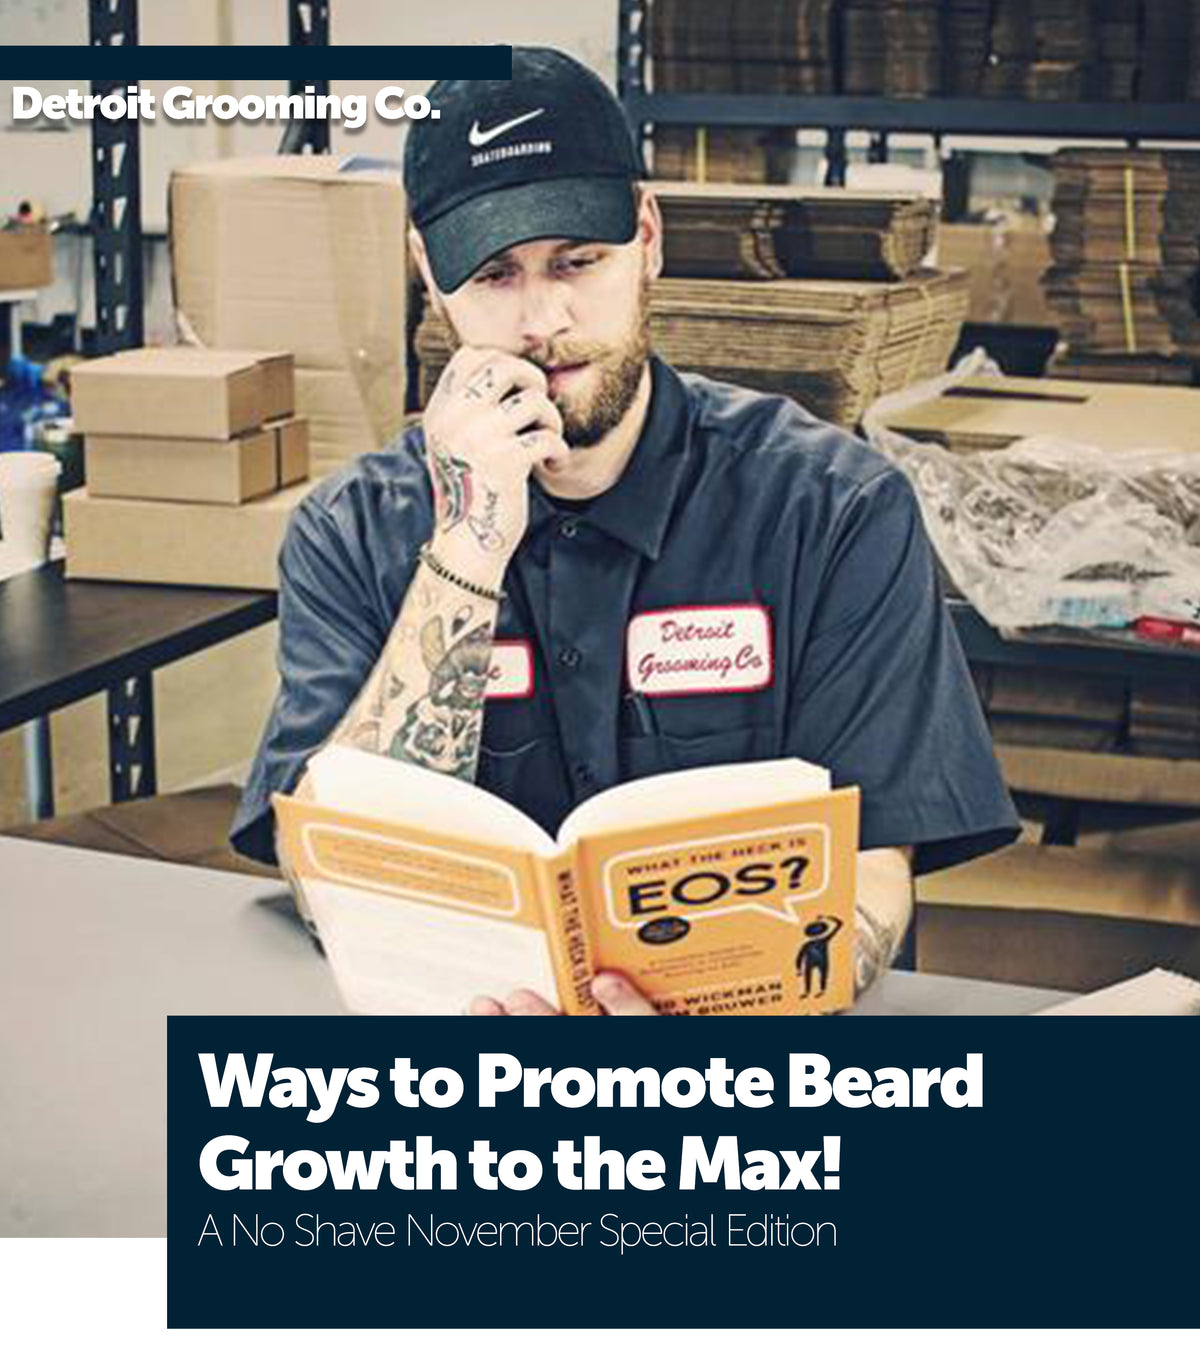 Ways to Promote Beard Growth to the Max! A No Shave November Special Edition